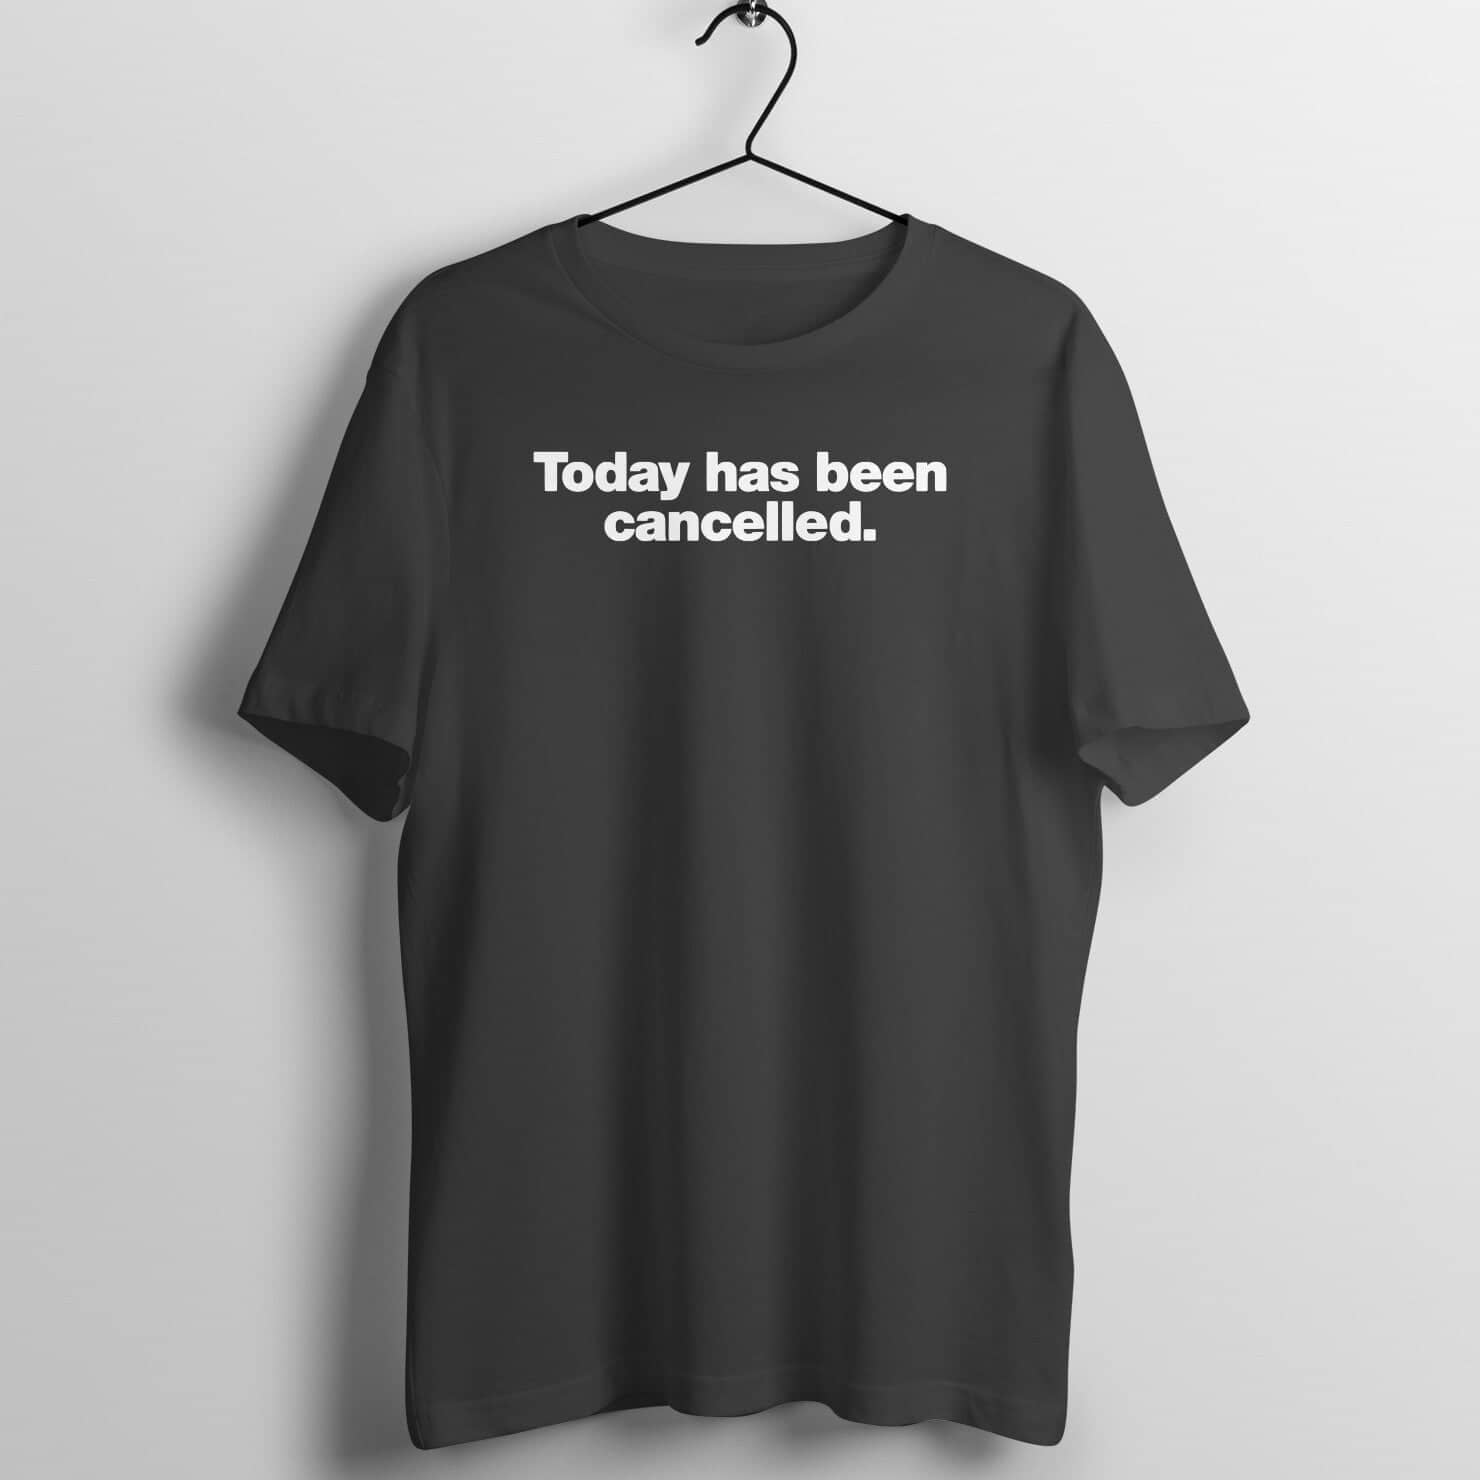 Today Has Been Cancelled Funny Black T Shirt for Men and Women Shirts & Tops Printrove Black S 